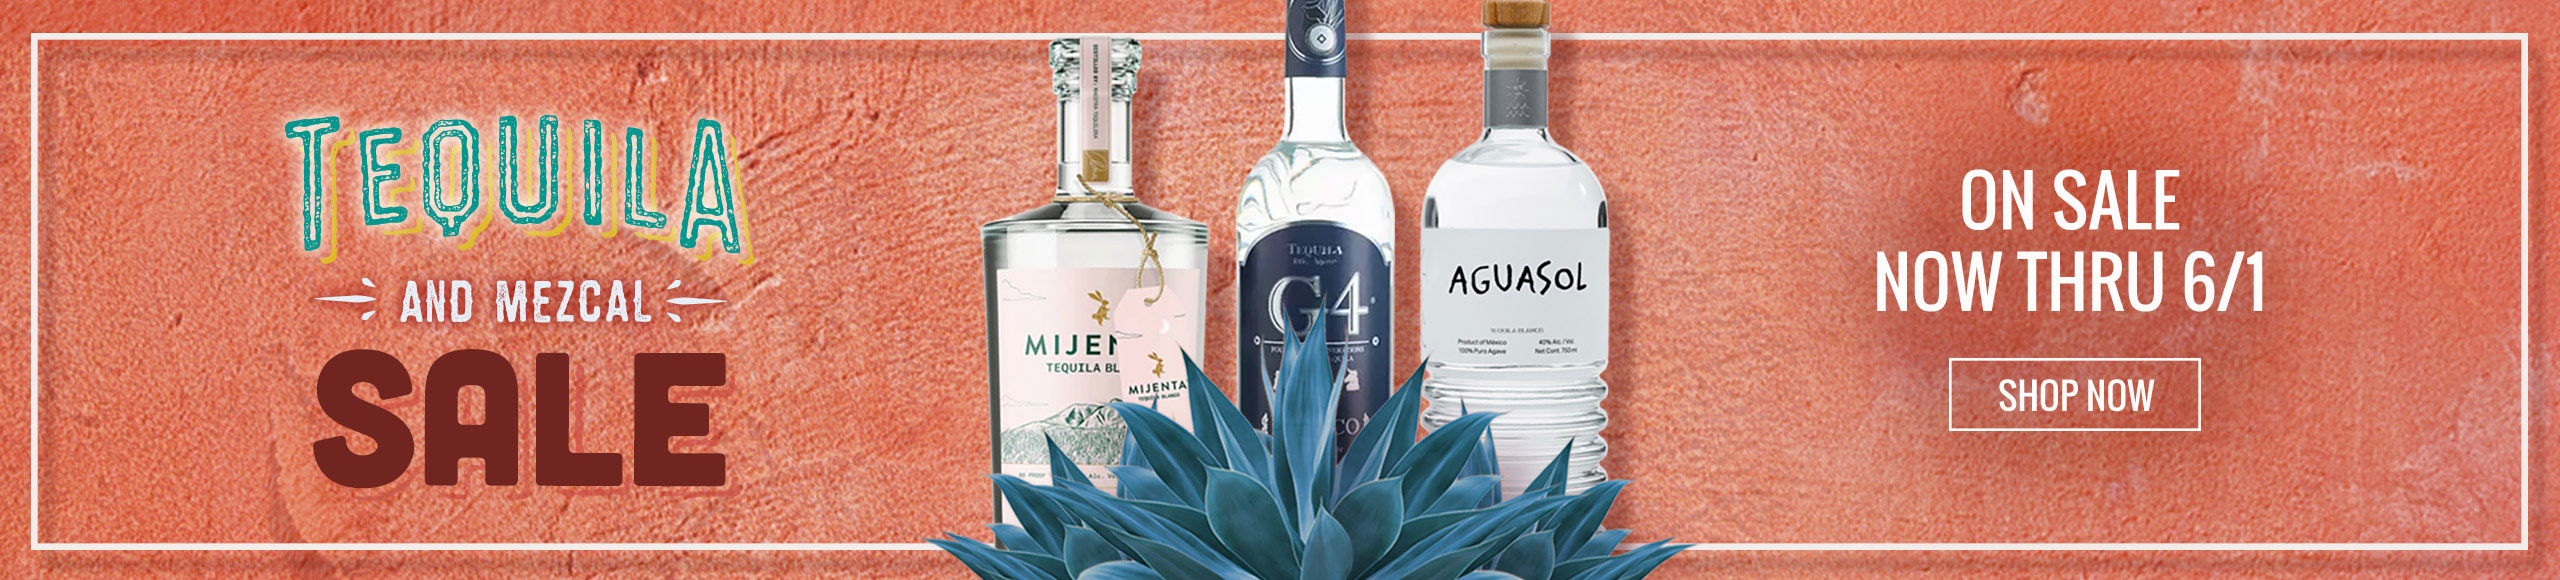 Tequila and Mezcal Sale